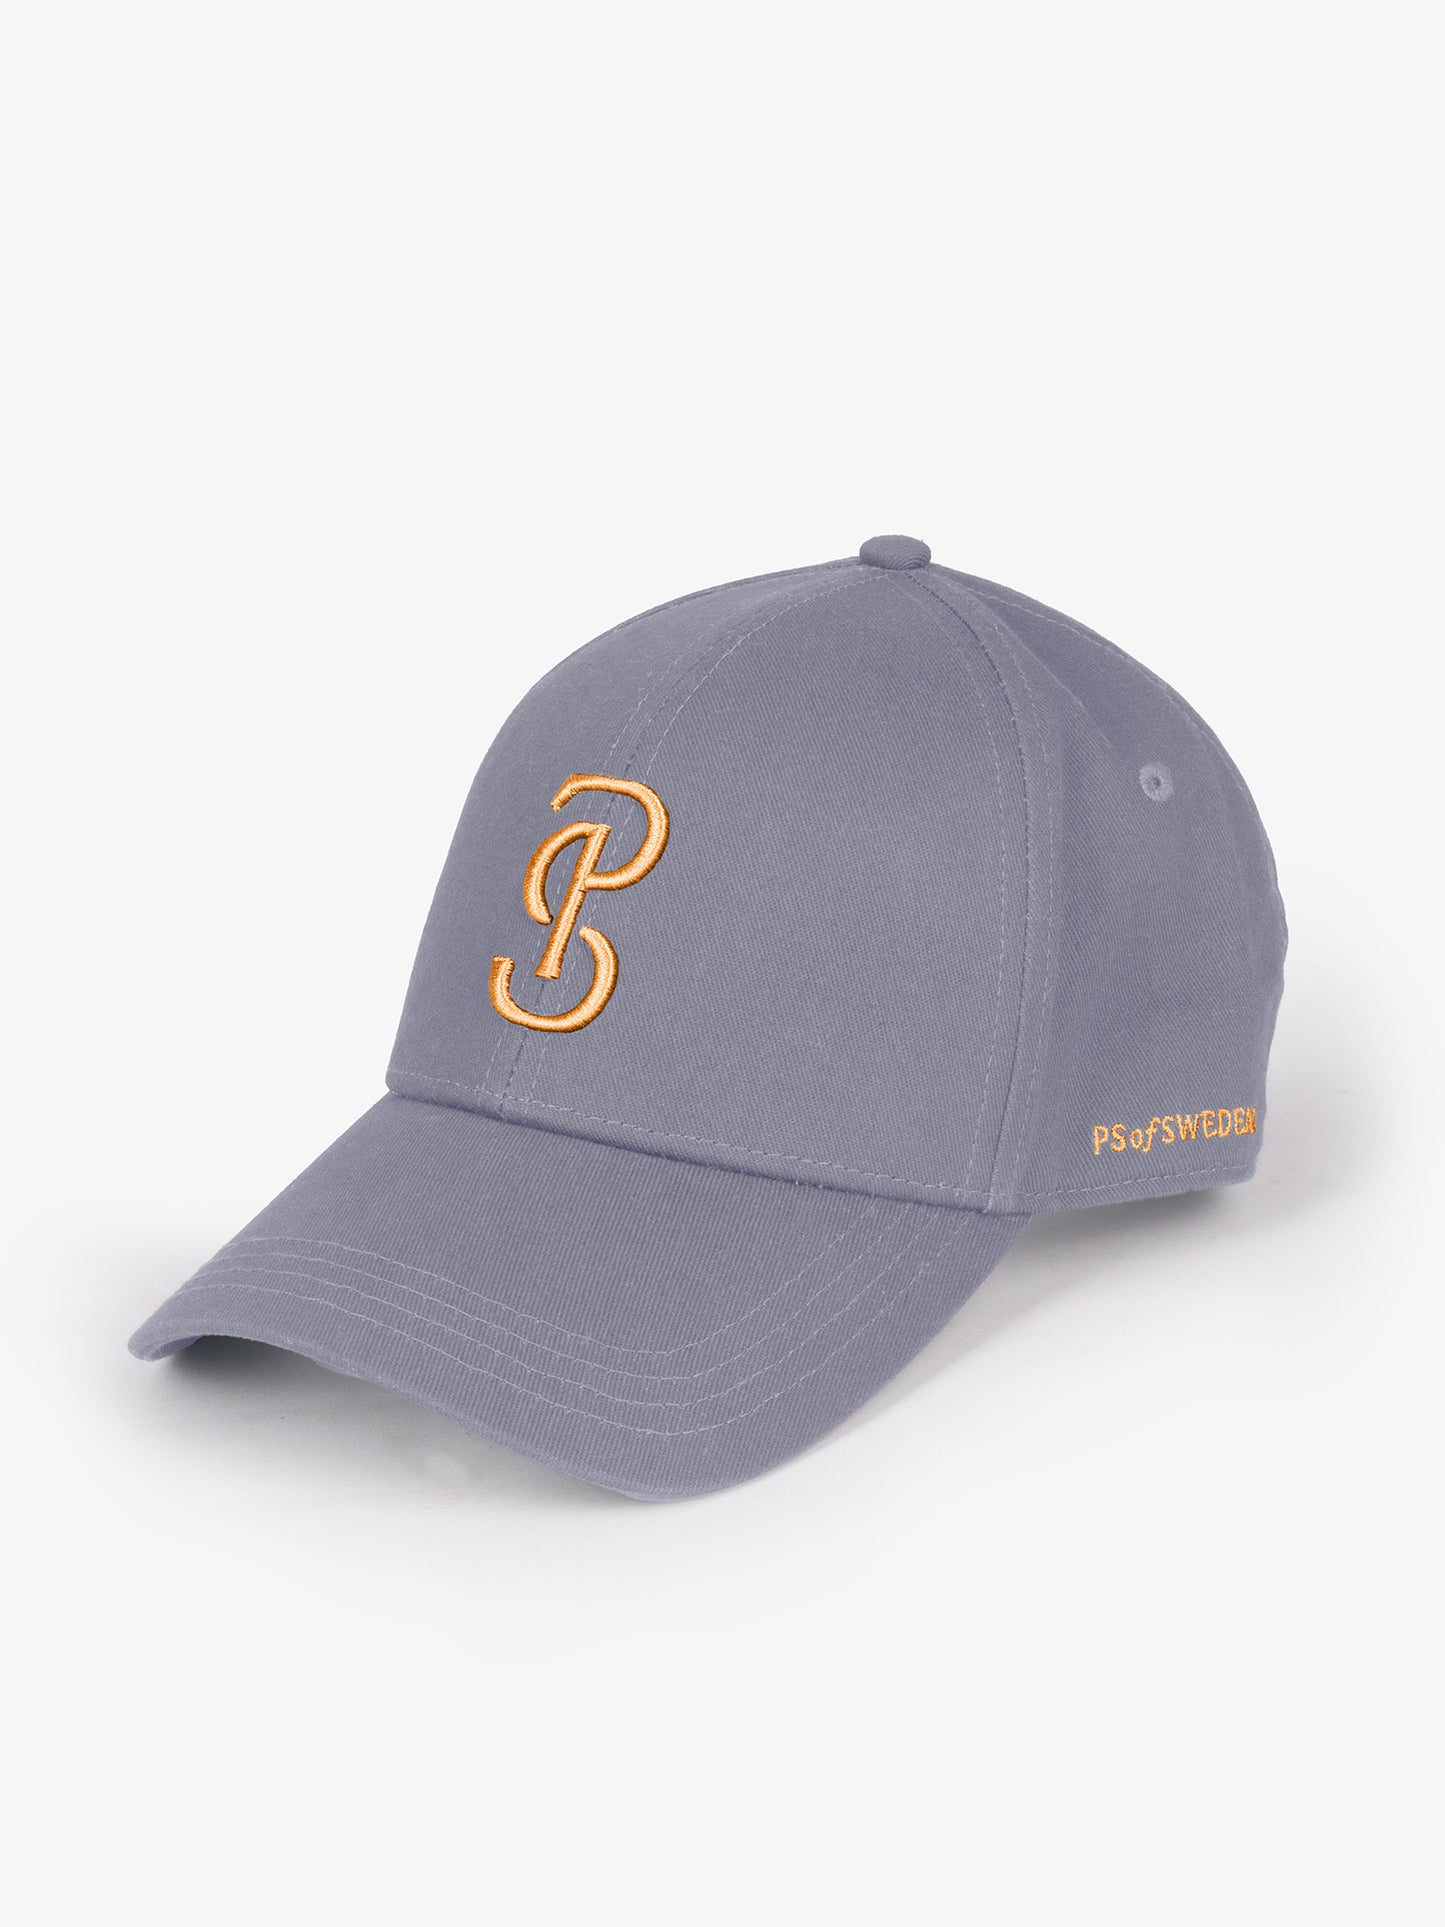 Classic fit baseball cap in cotton twill with large 3D embroidery at front and metal clasp adjustable strap at back.